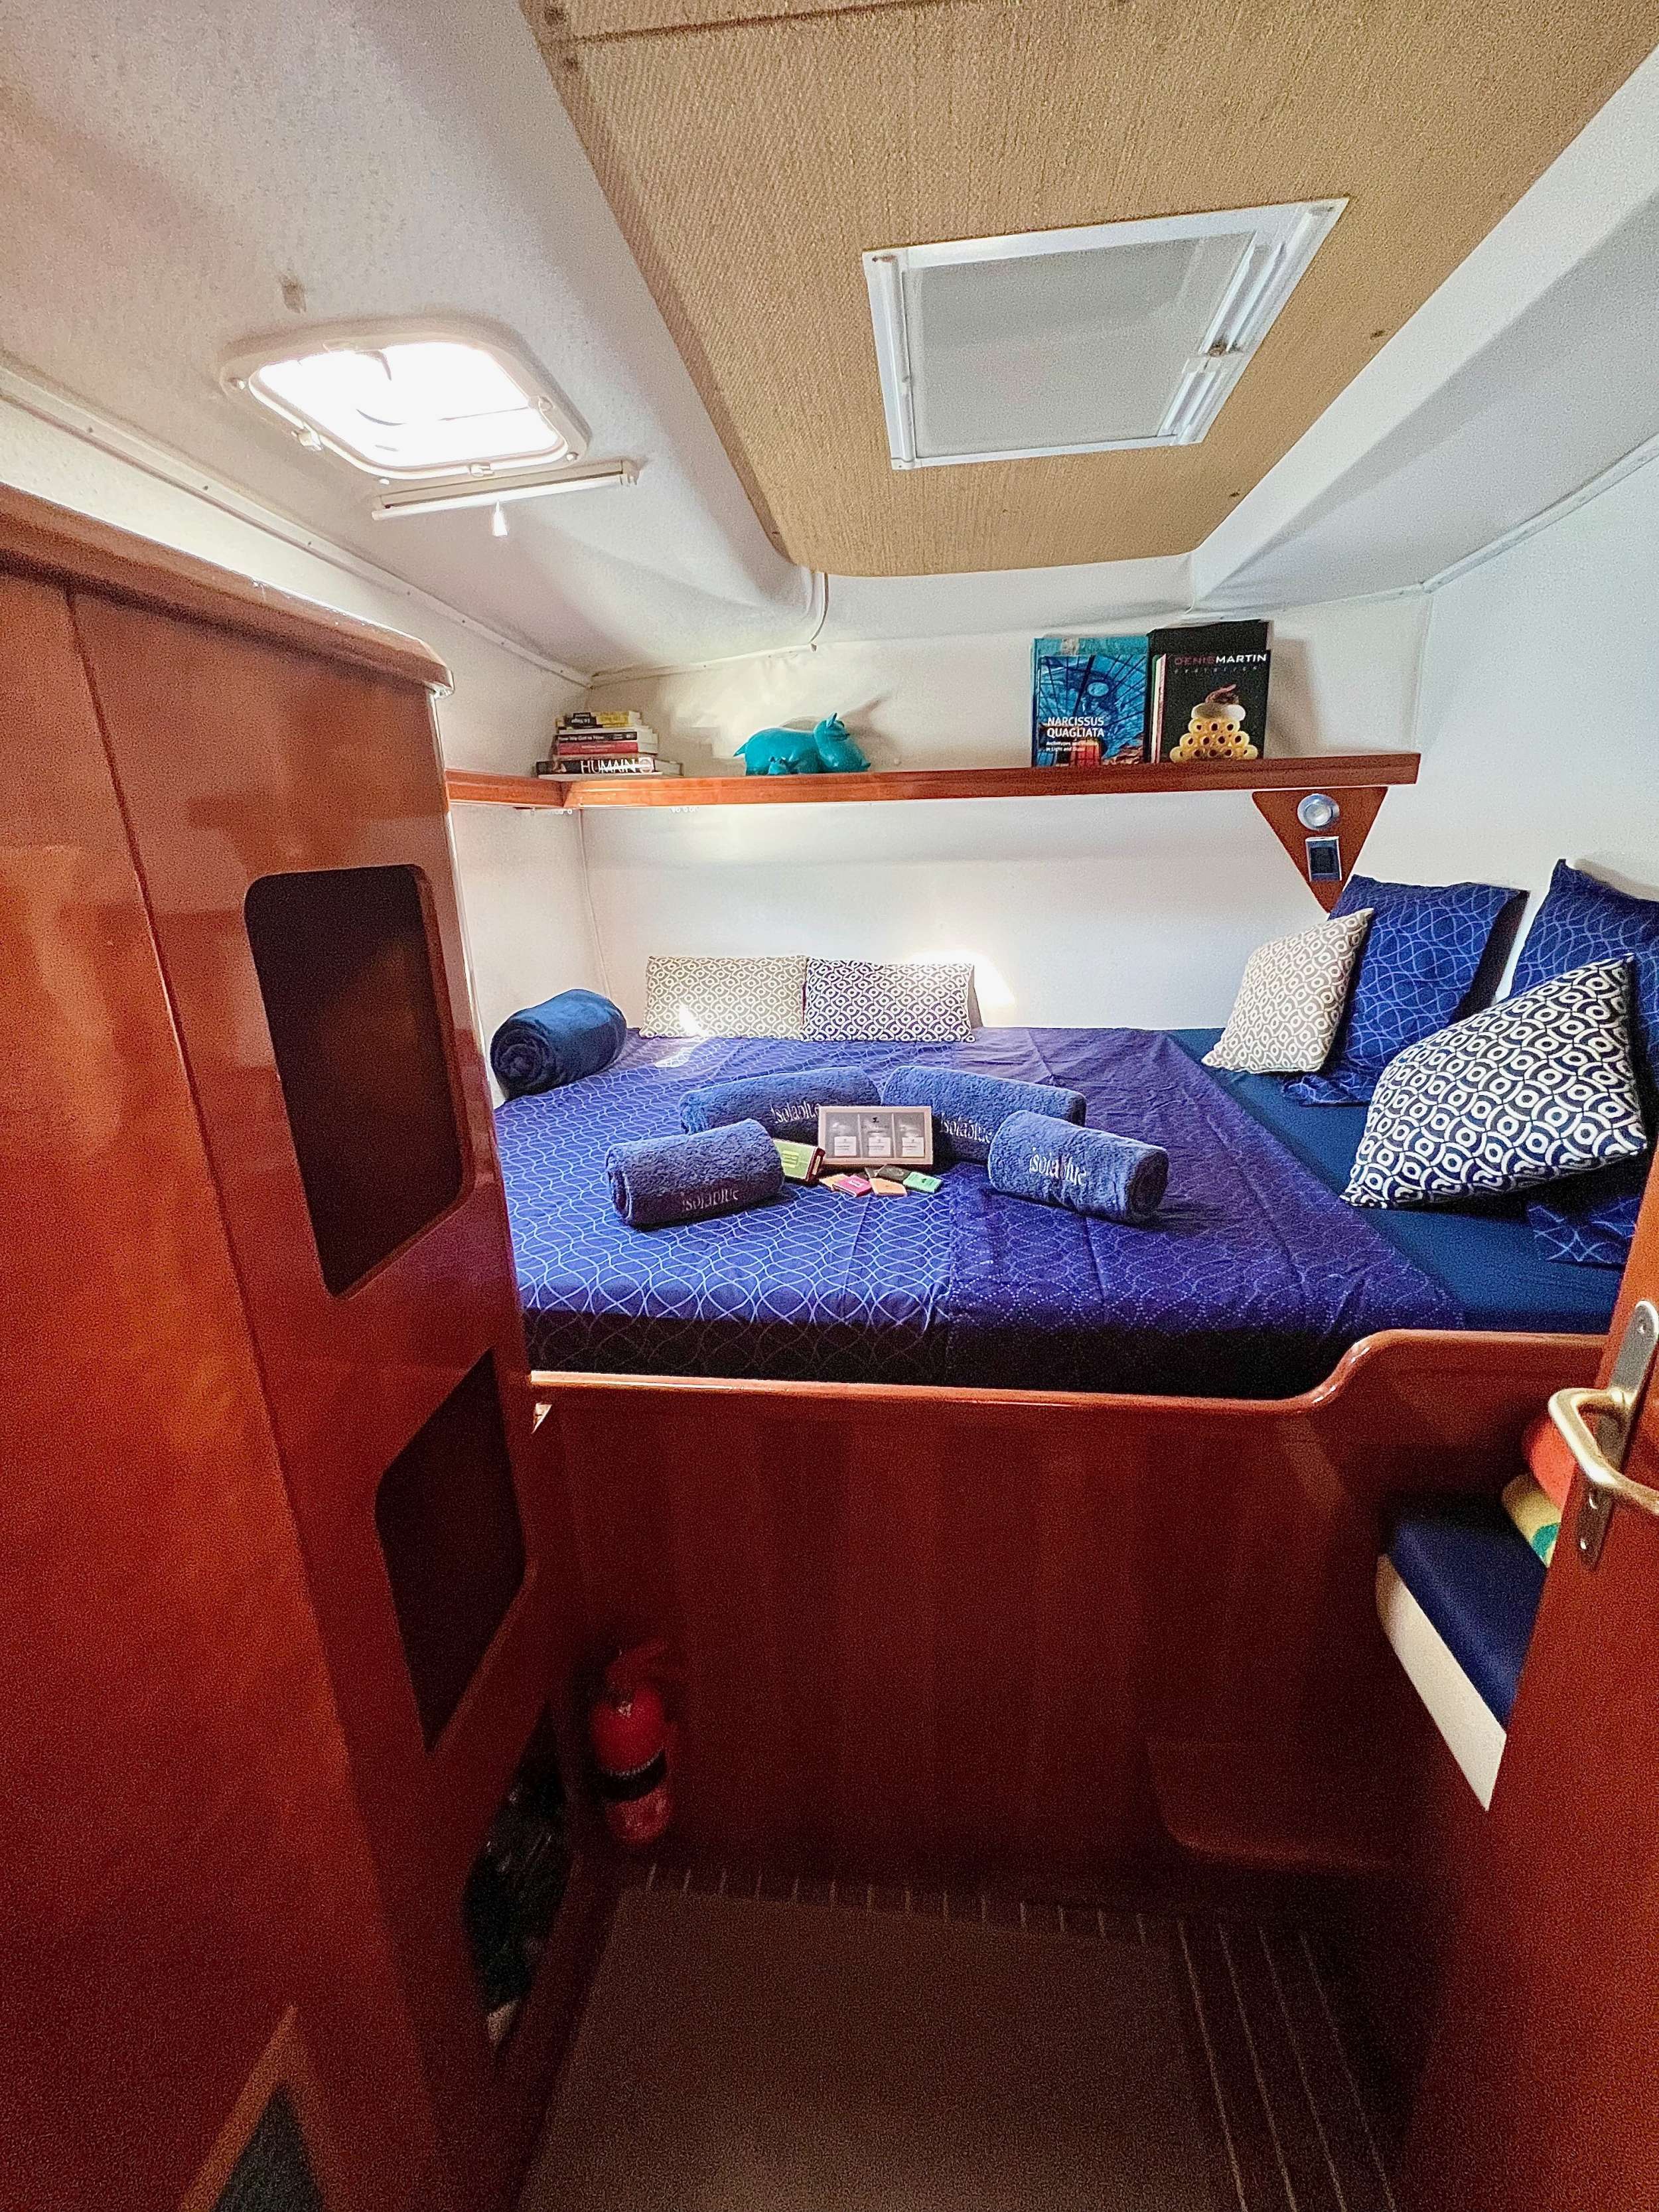 ISOLABLUE Yacht Charter - Beautiful Details Throughout!